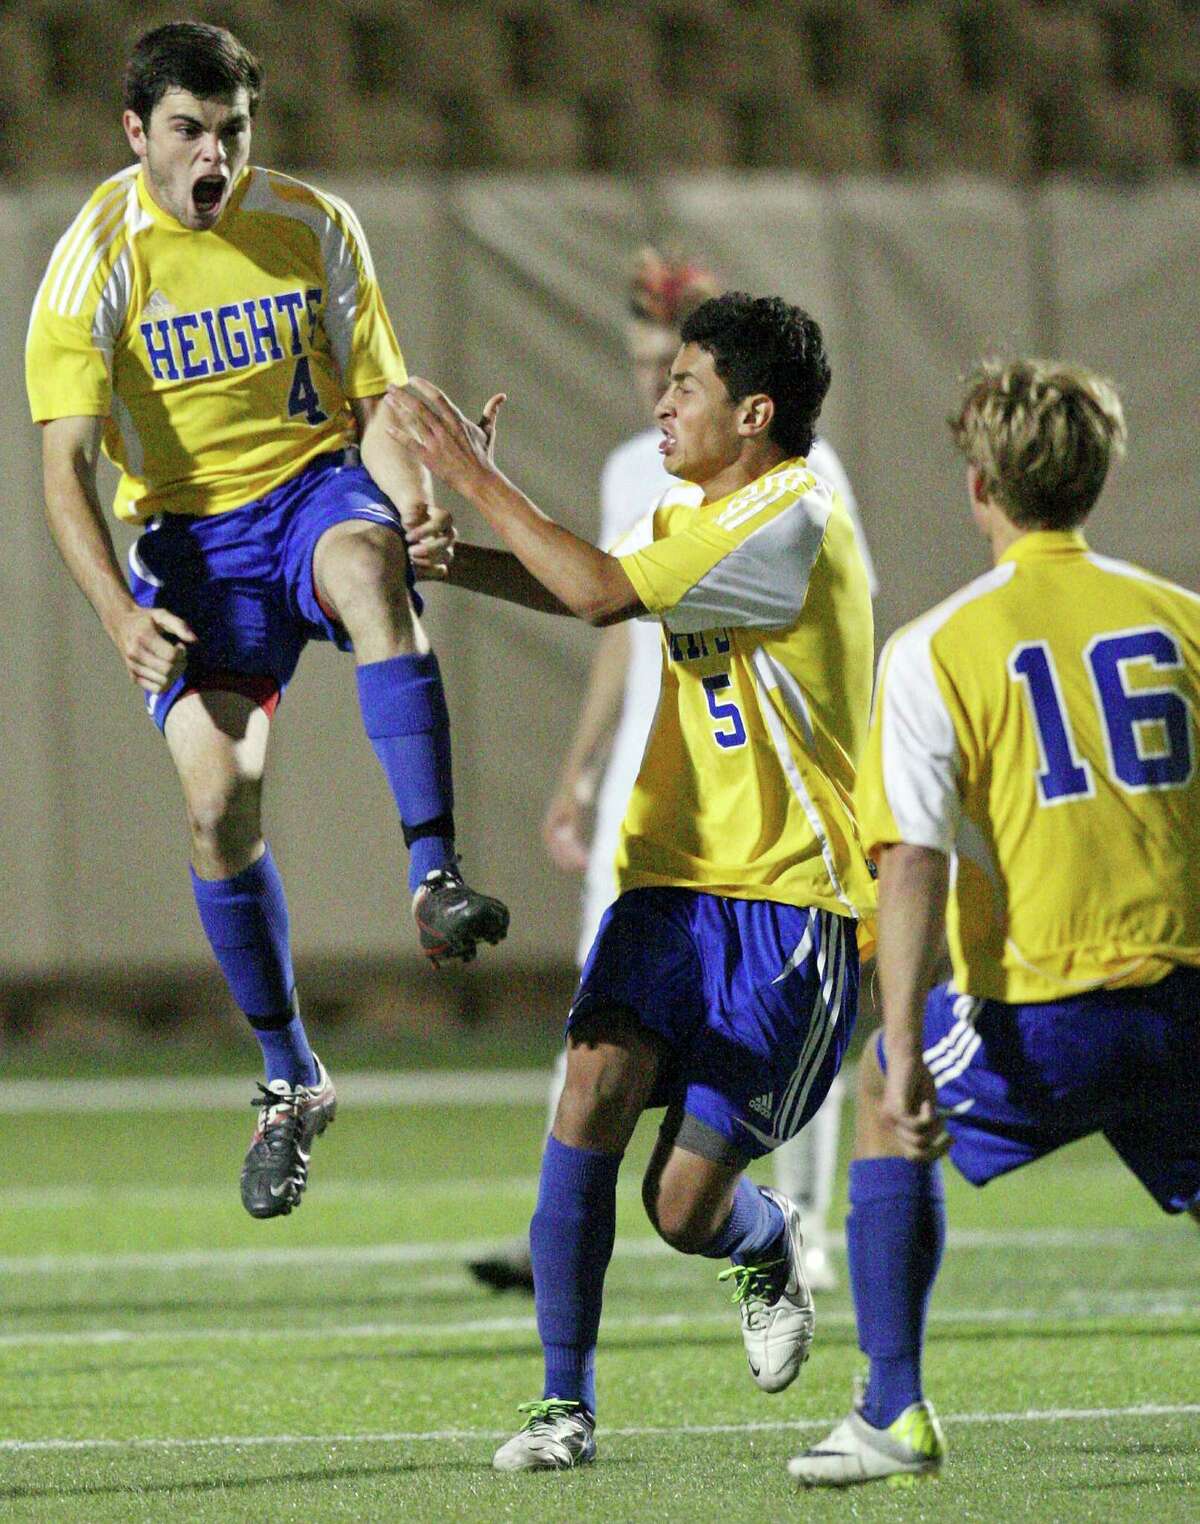 Alamo Heights' Alek Strimple (from left) celebrates with teammates Jesus Espin, and Robert Weigel after scoring against Wichita Falls Rider during overtime action of their Class 4A state final game Saturday, April 21, 2012 at Birkelbach Field in Georgetown. Alamo Heights won 3-2 in a shootout.